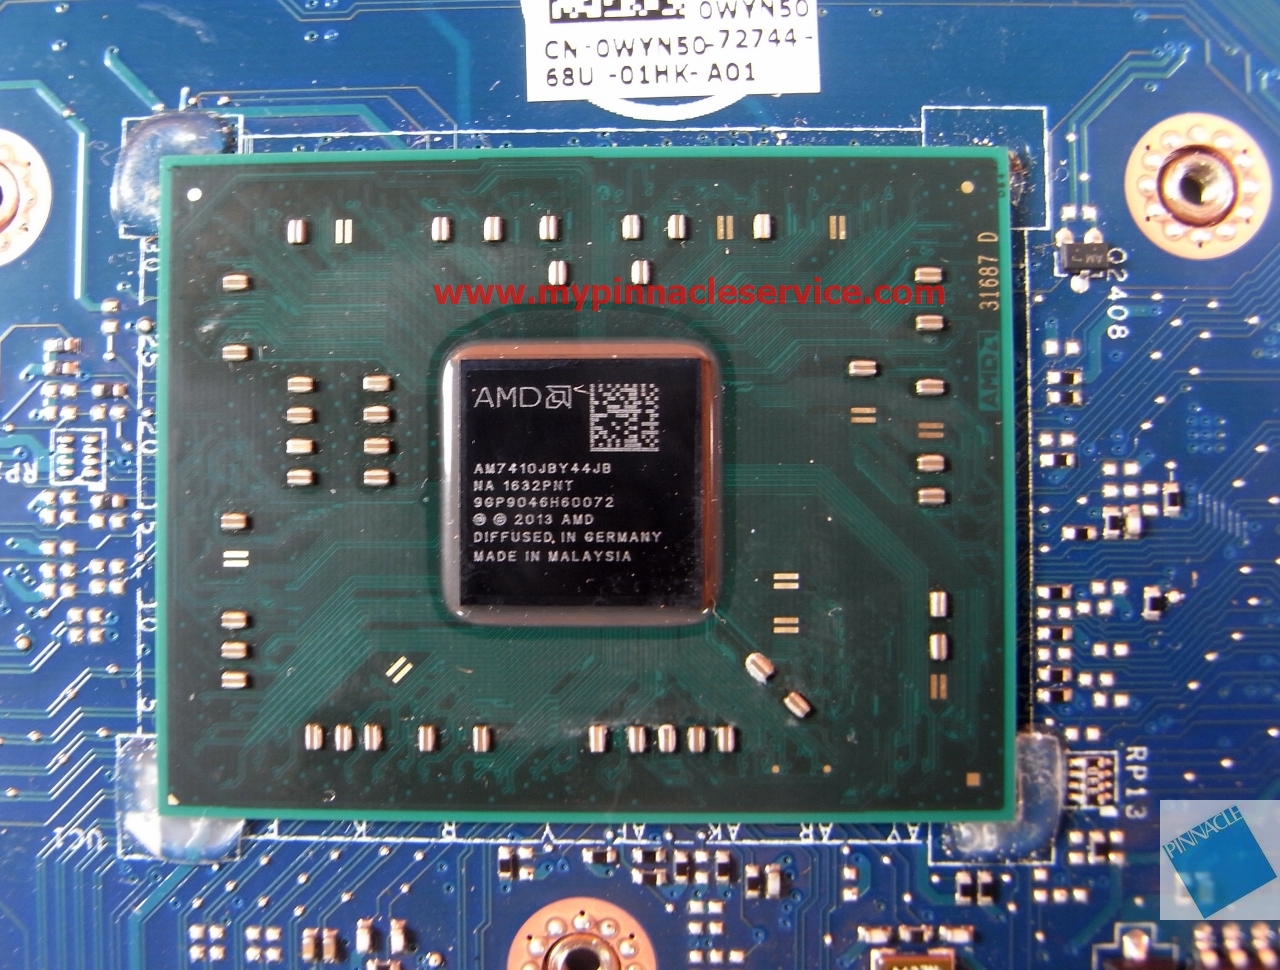 https://cdn10.bigcommerce.com/s-413o11fcmw/product_images/uploaded_images/1n0c6-01n0c6-motherboard-for-dell-inspiron-5555-5755-a8-7410-cpu-la-c142p-r0011681.jpg